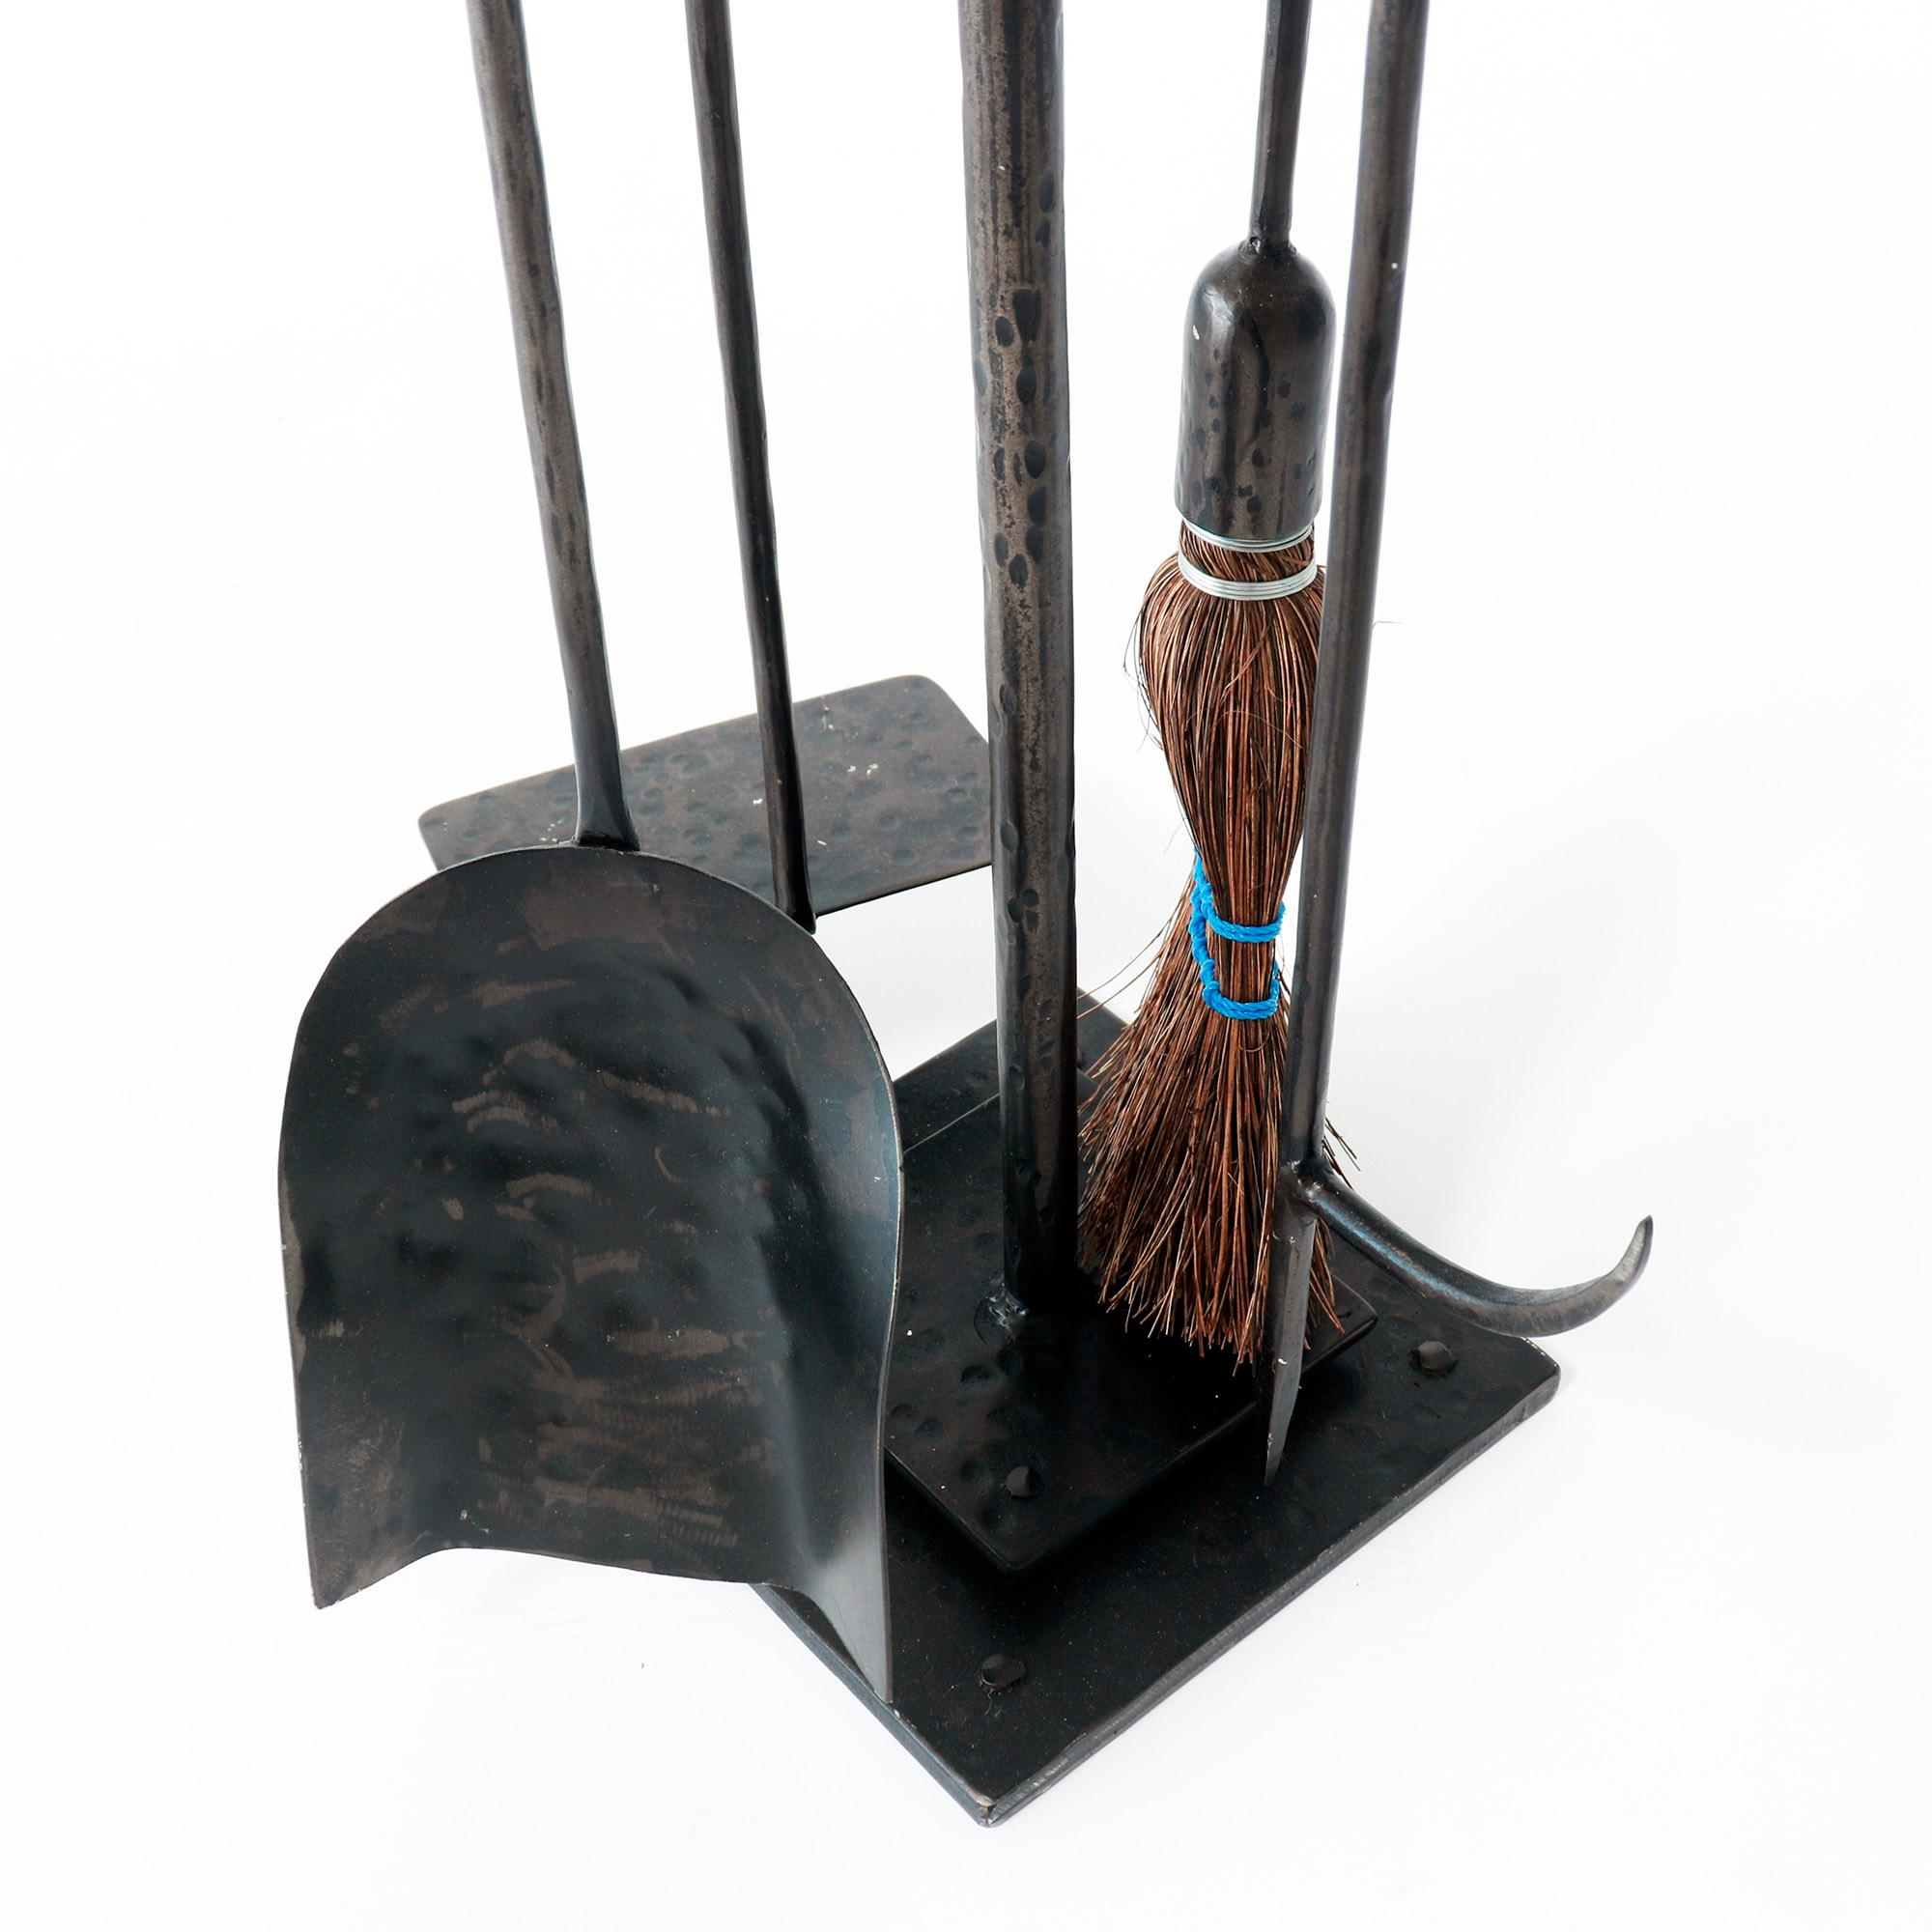 This hand forged iron fireplace tool set includes a poker, brush, shovel, and log pull. The blackened metal tower adds a touch of class to your fireplace display. 

Add style and function to your fireplace with this high-quality, hand-forged iron